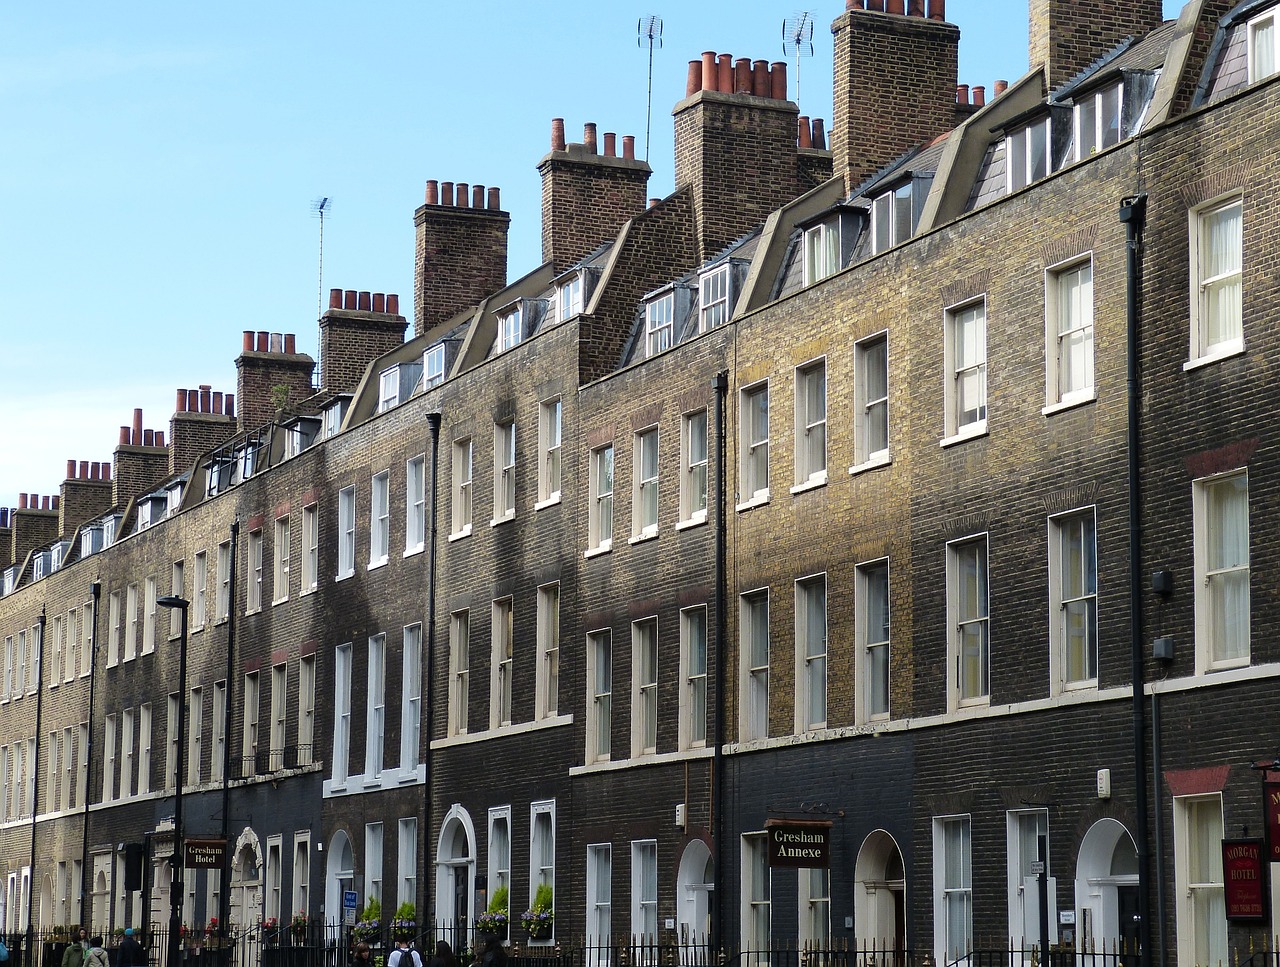 LandlordBuyer research finds 41% increase in homebuilding in last 10 years